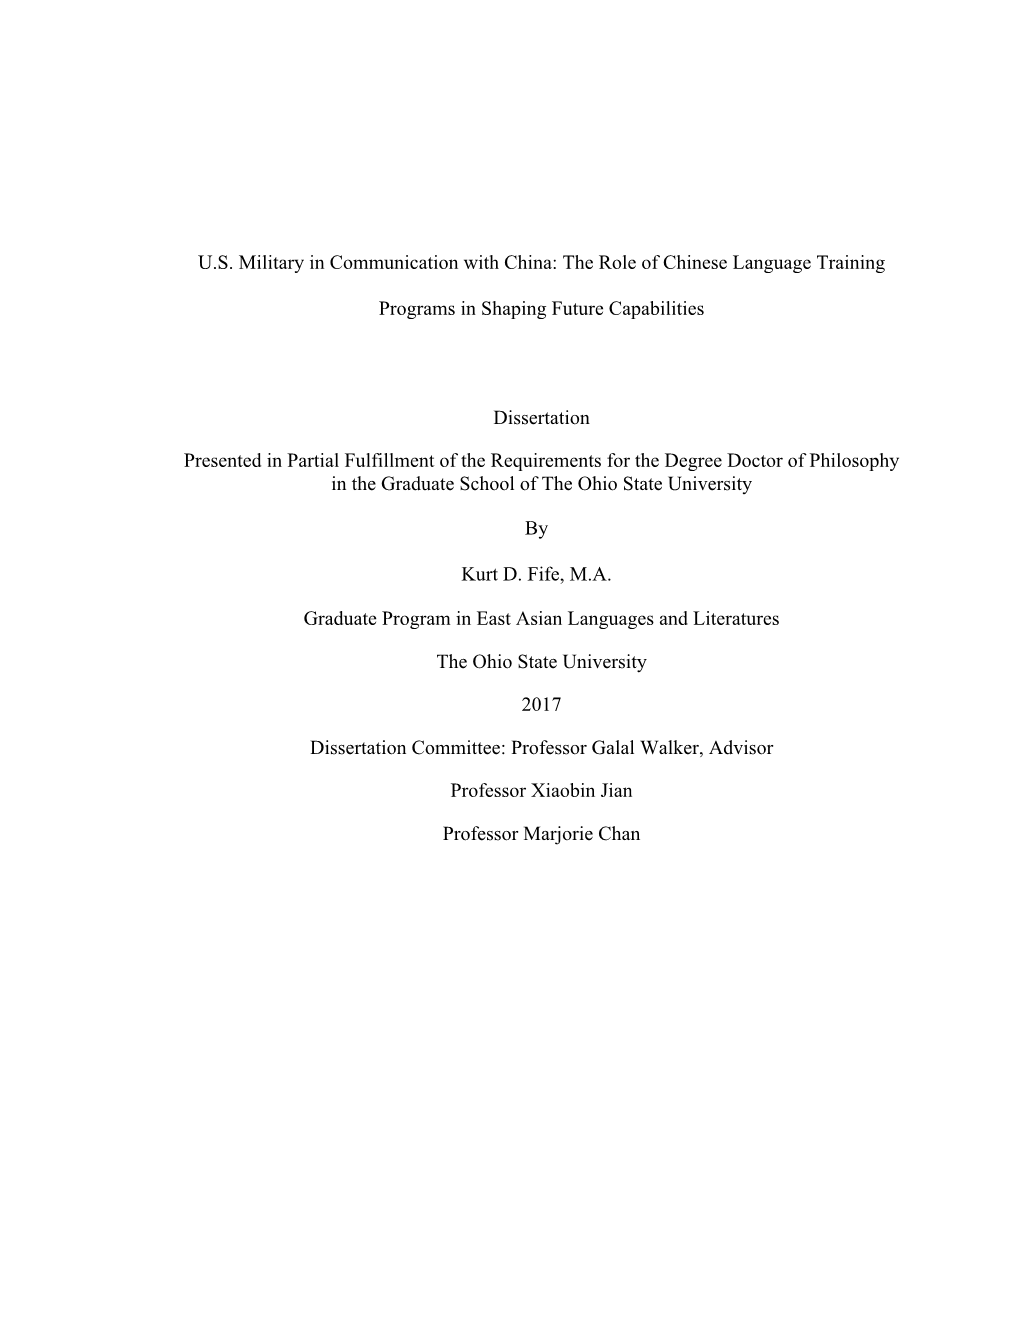 US Military in Communication with China: the Role of Chinese Language Training